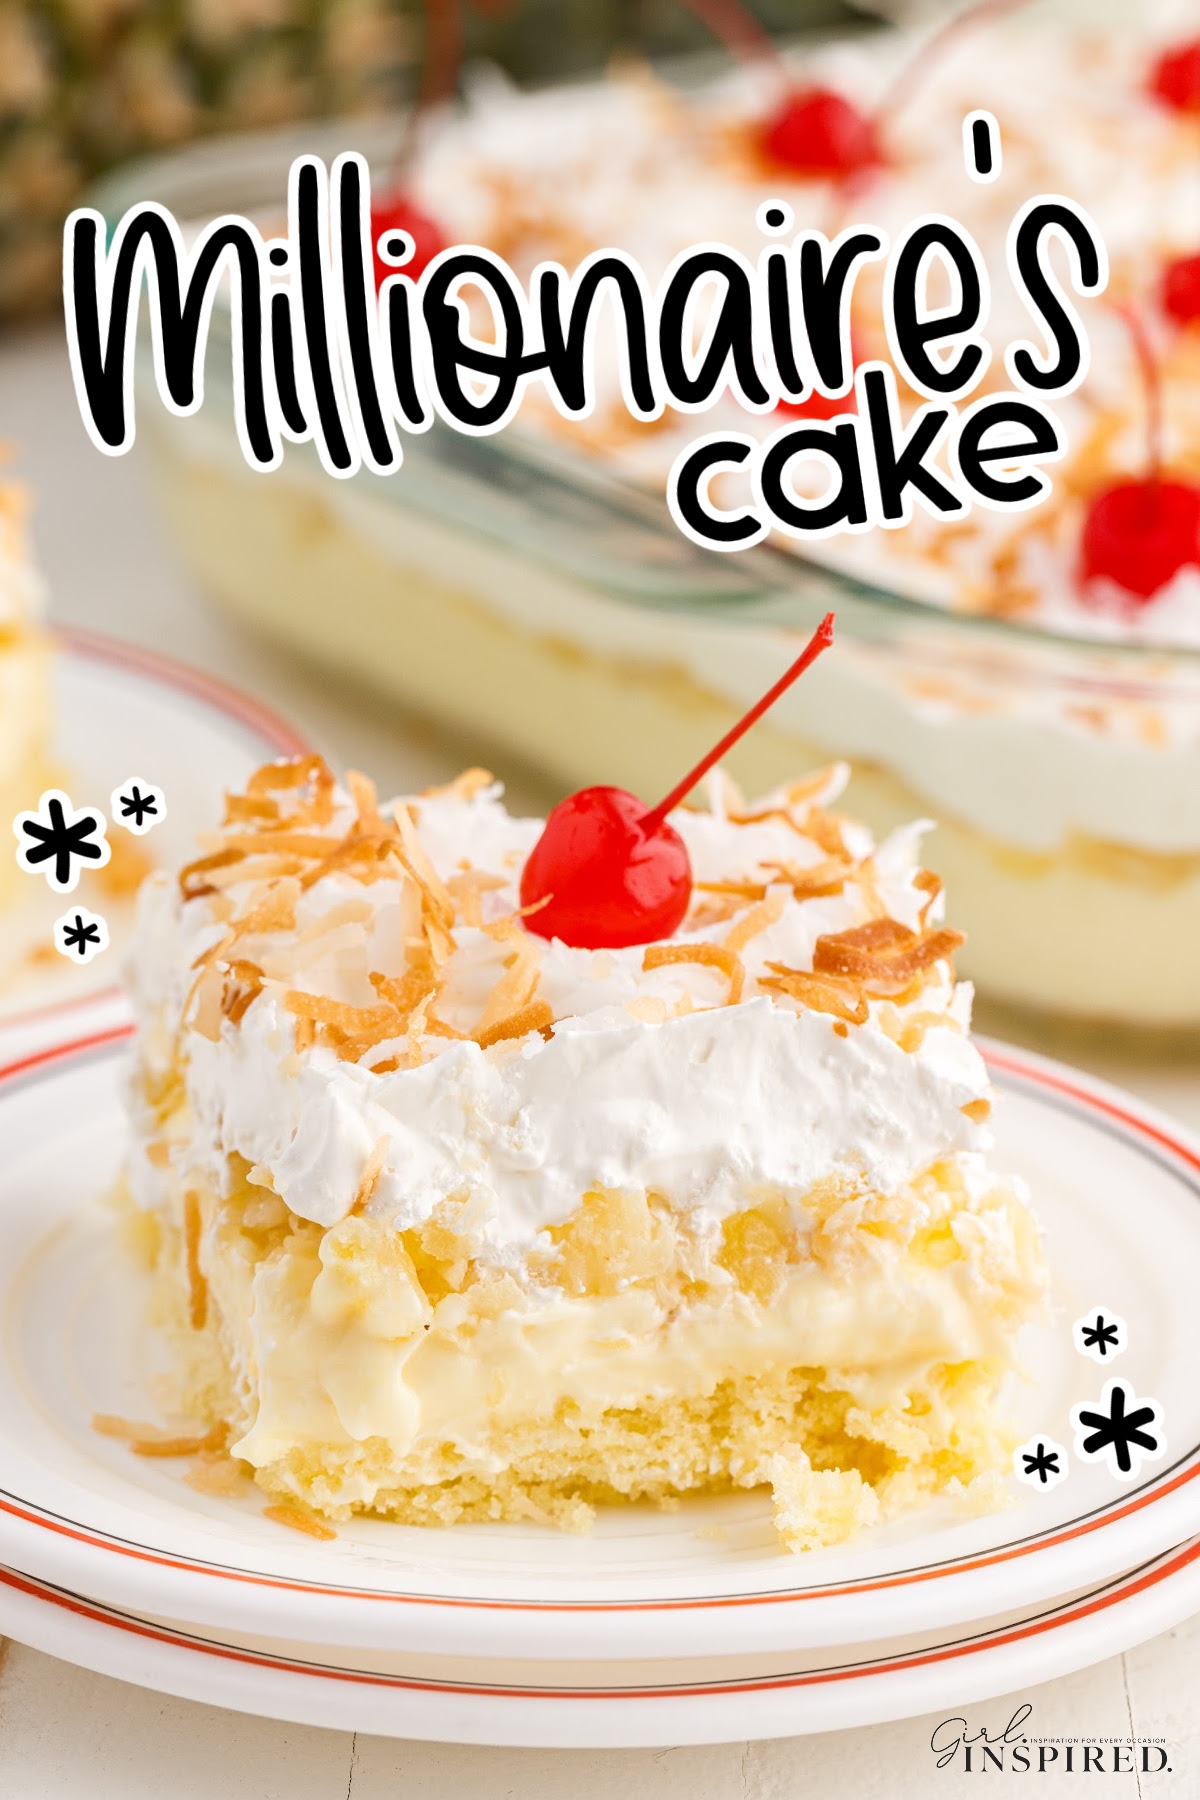 A slice of Millionaire’s Cake on a plate with text overlay.